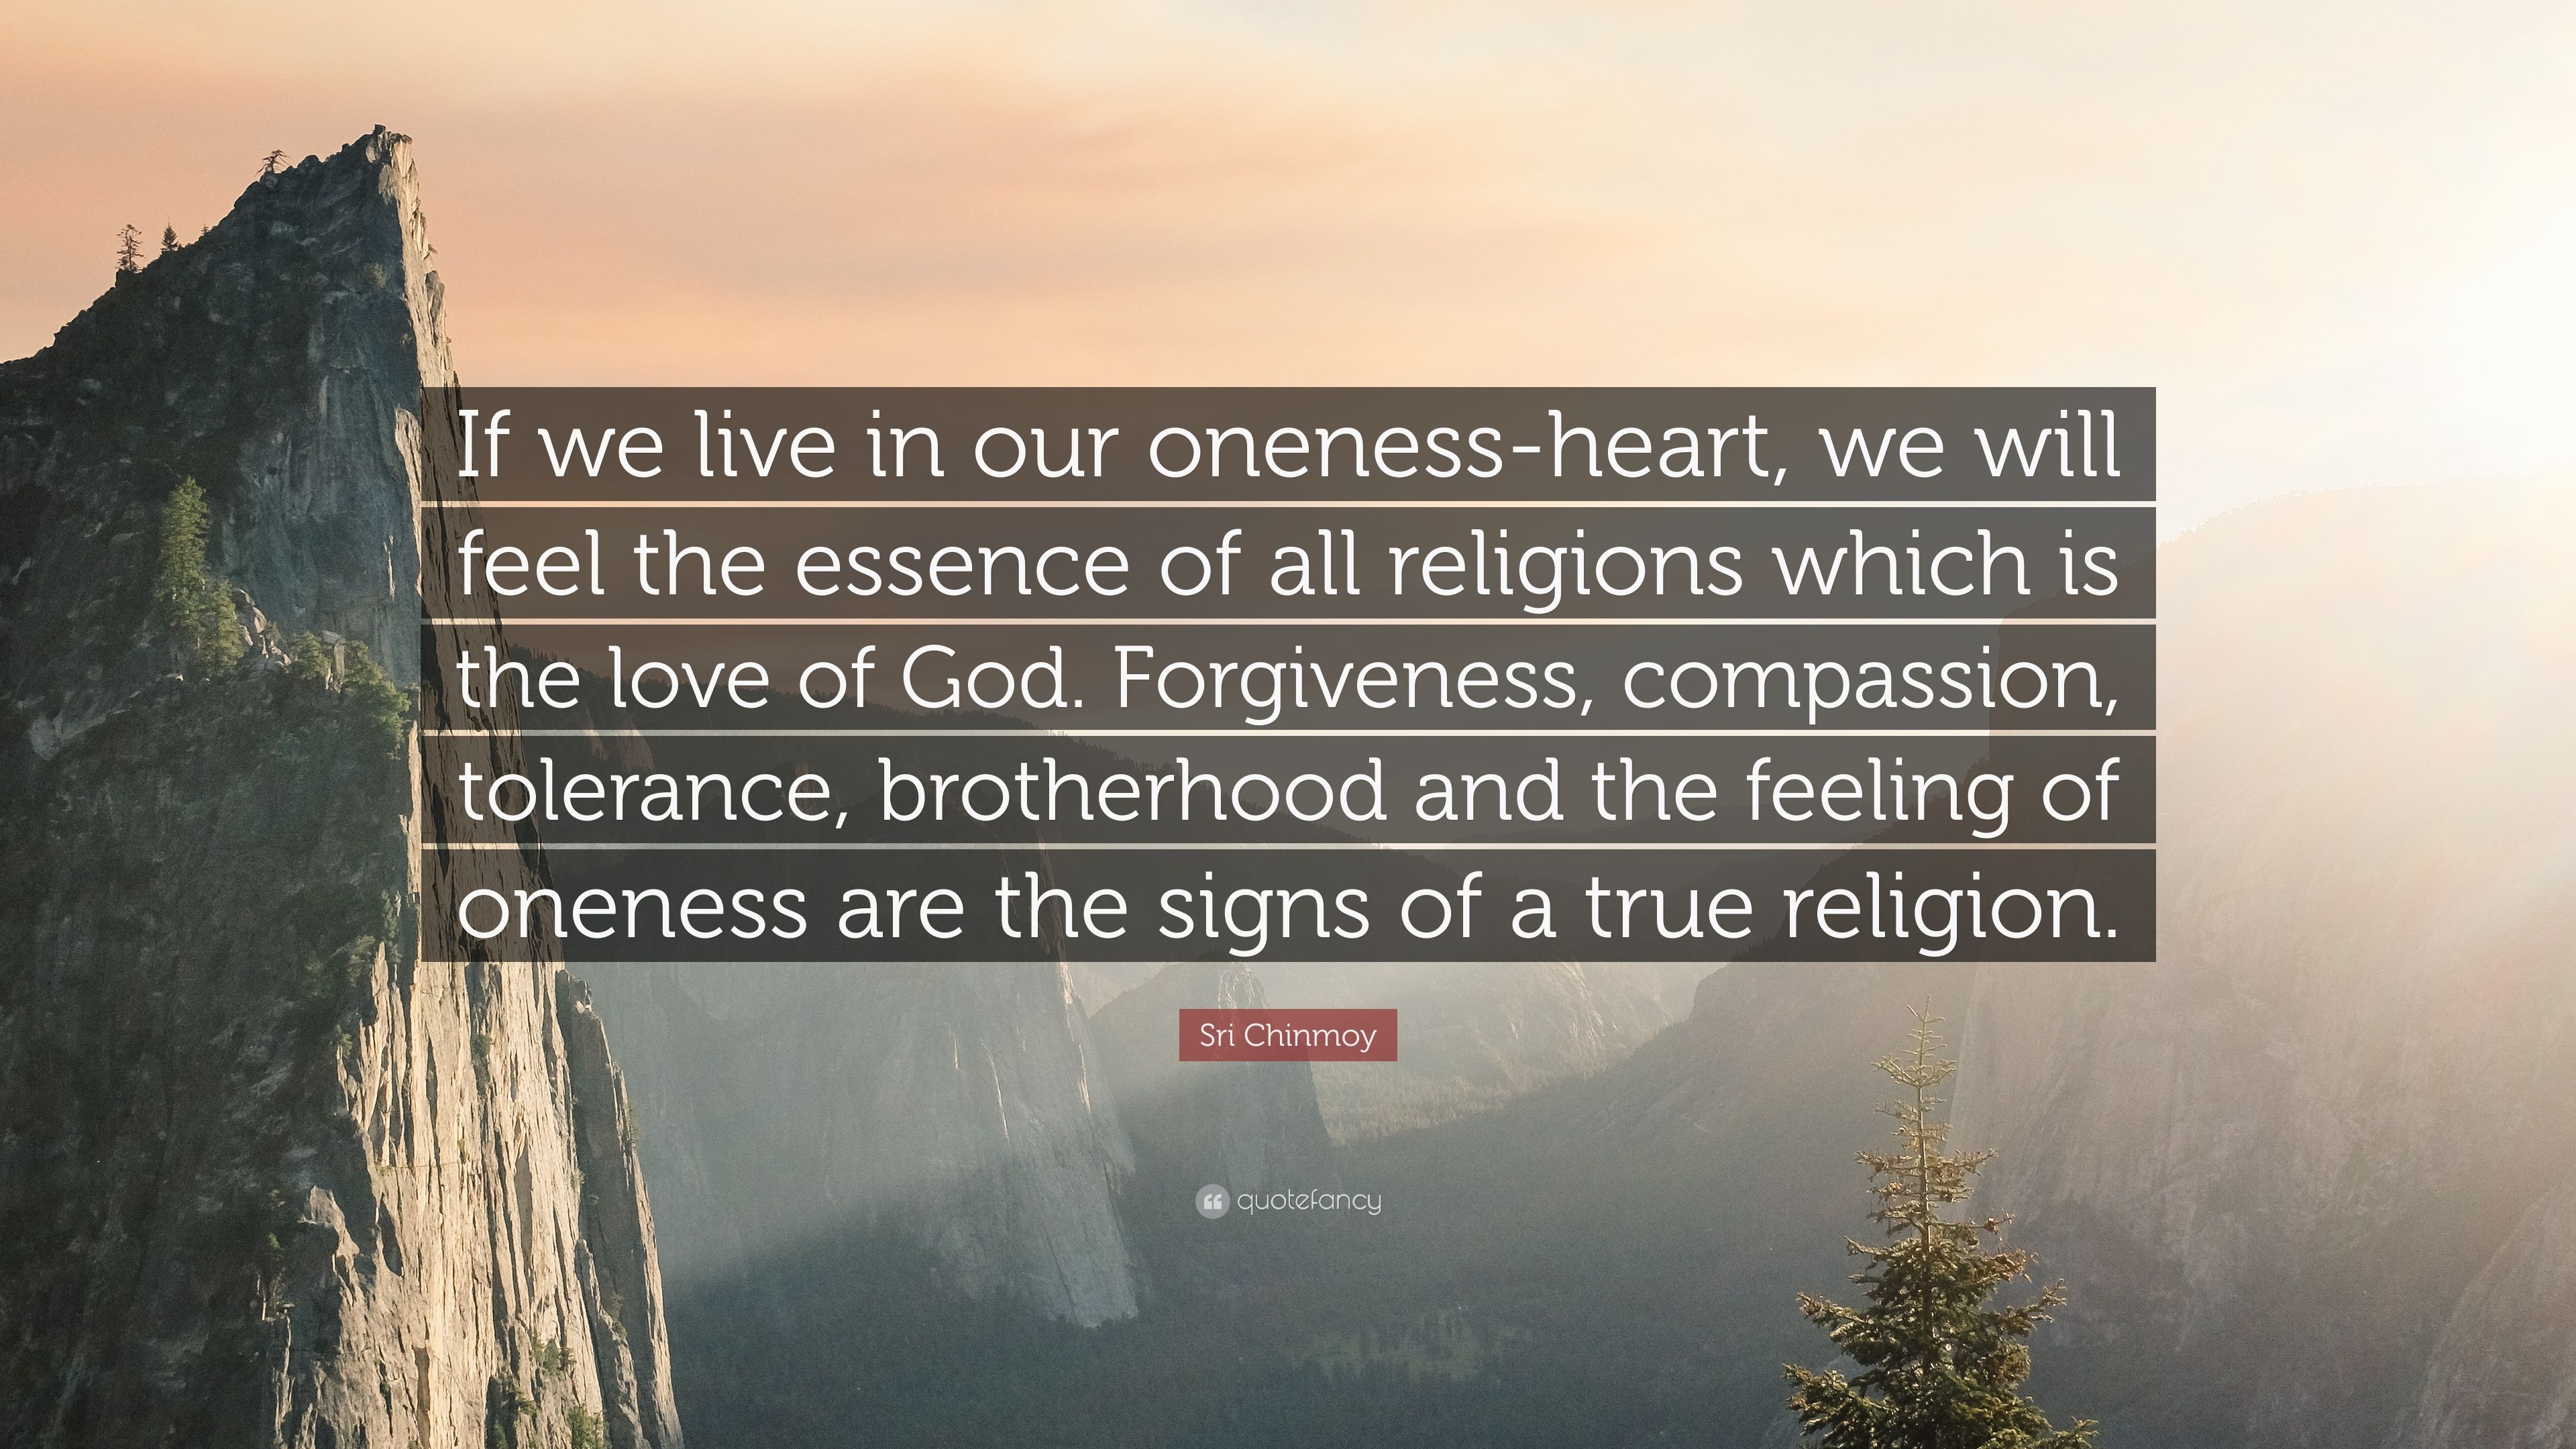 Sri Chinmoy Quote: “If We Live In Our Oneness Heart, We Will Feel The Essence Of All Religions Which Is The Love Of God. Forgiveness, Compas.” (7 Wallpaper)